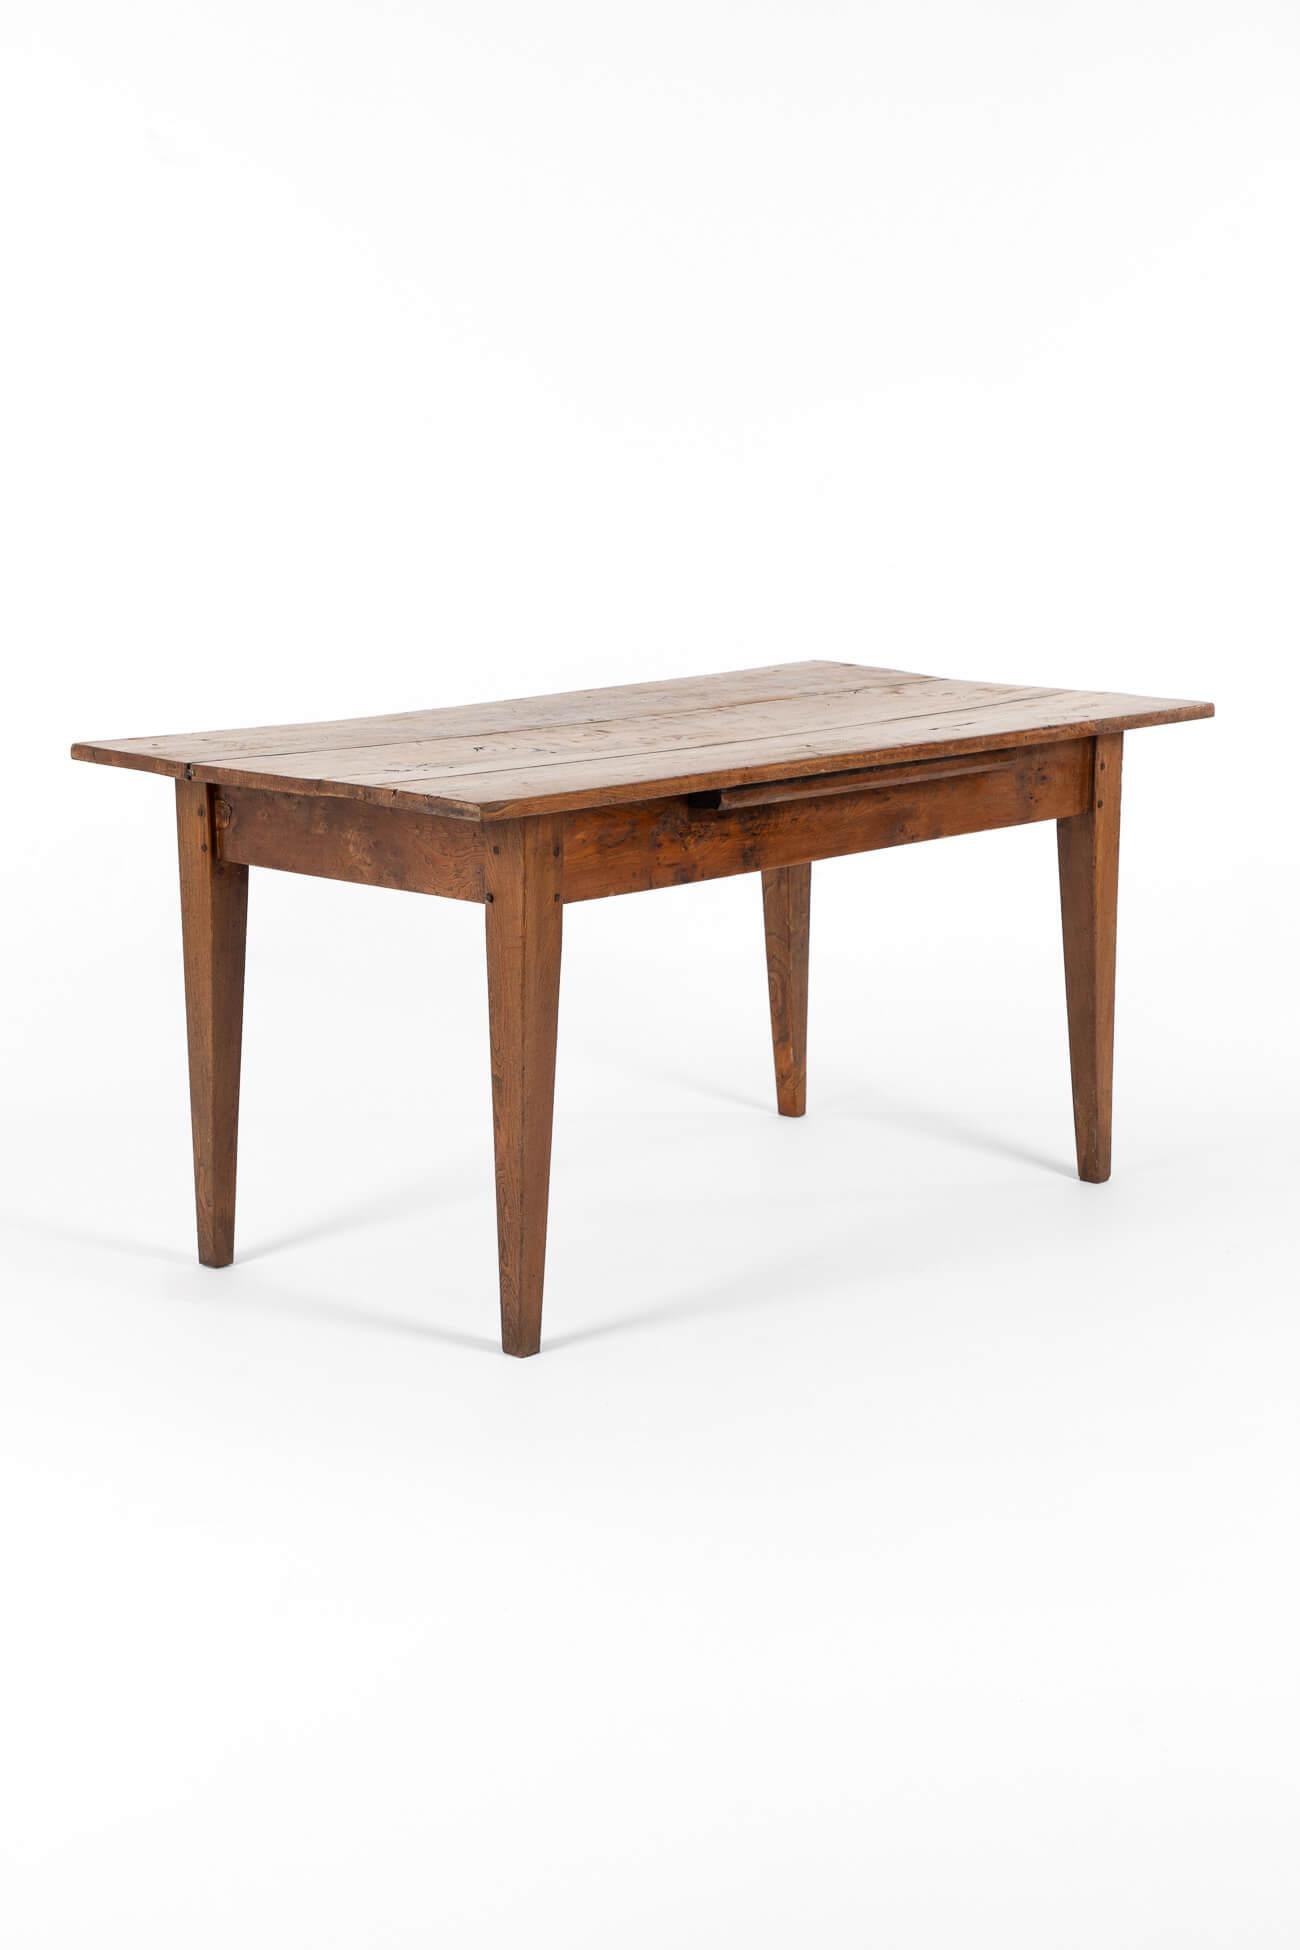 A small French side table in walnut with a charming central breadboard that extends from beneath the apron.

The triple plank walnut top has an exquisite grain and colour.

Raised on four pegged tapered legs.

France, circa 1860.

TOTAL

L: 148 CM